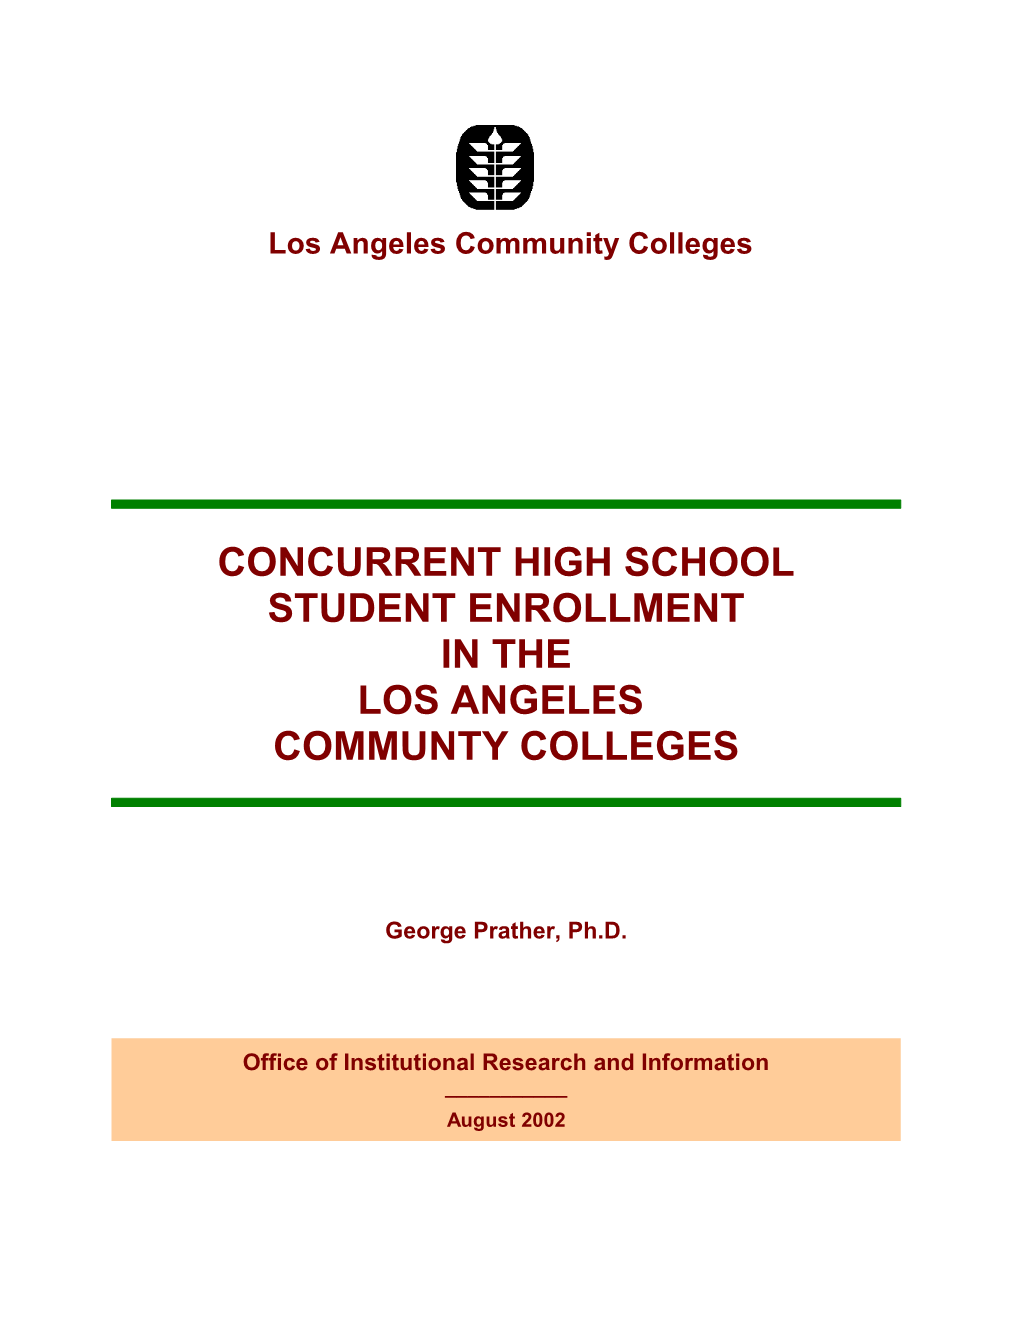 CONCURRENT HIGH SCHOOL STUDENTS, Fall Terms, 1996-2001